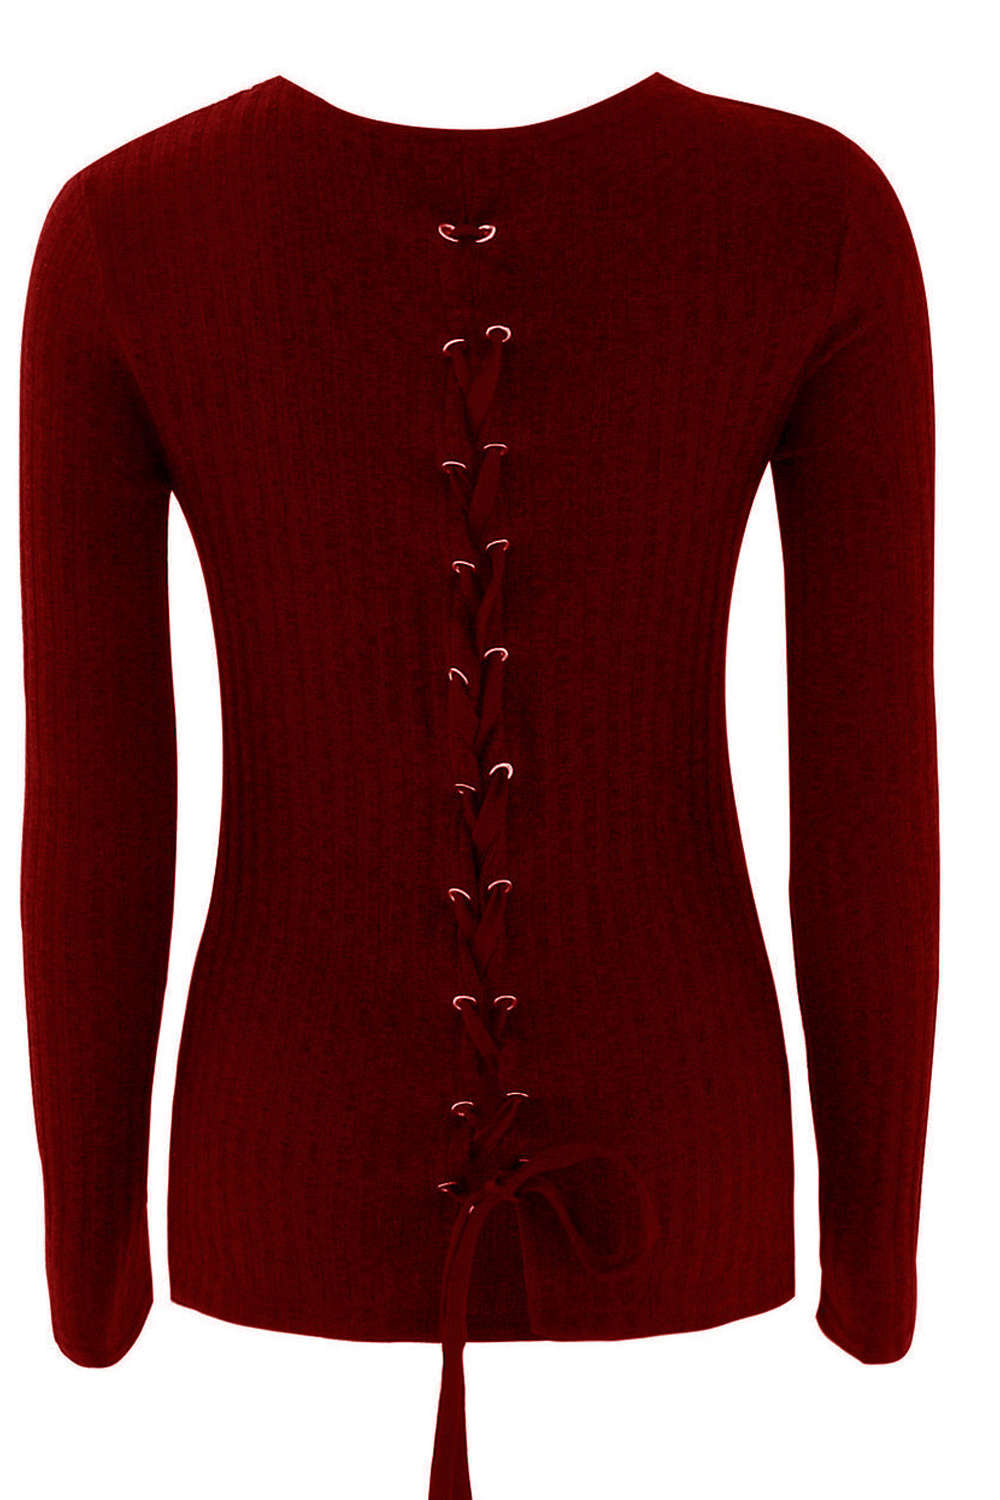 Iyasson Women's Knitted Back Lace Up Slim Sweater